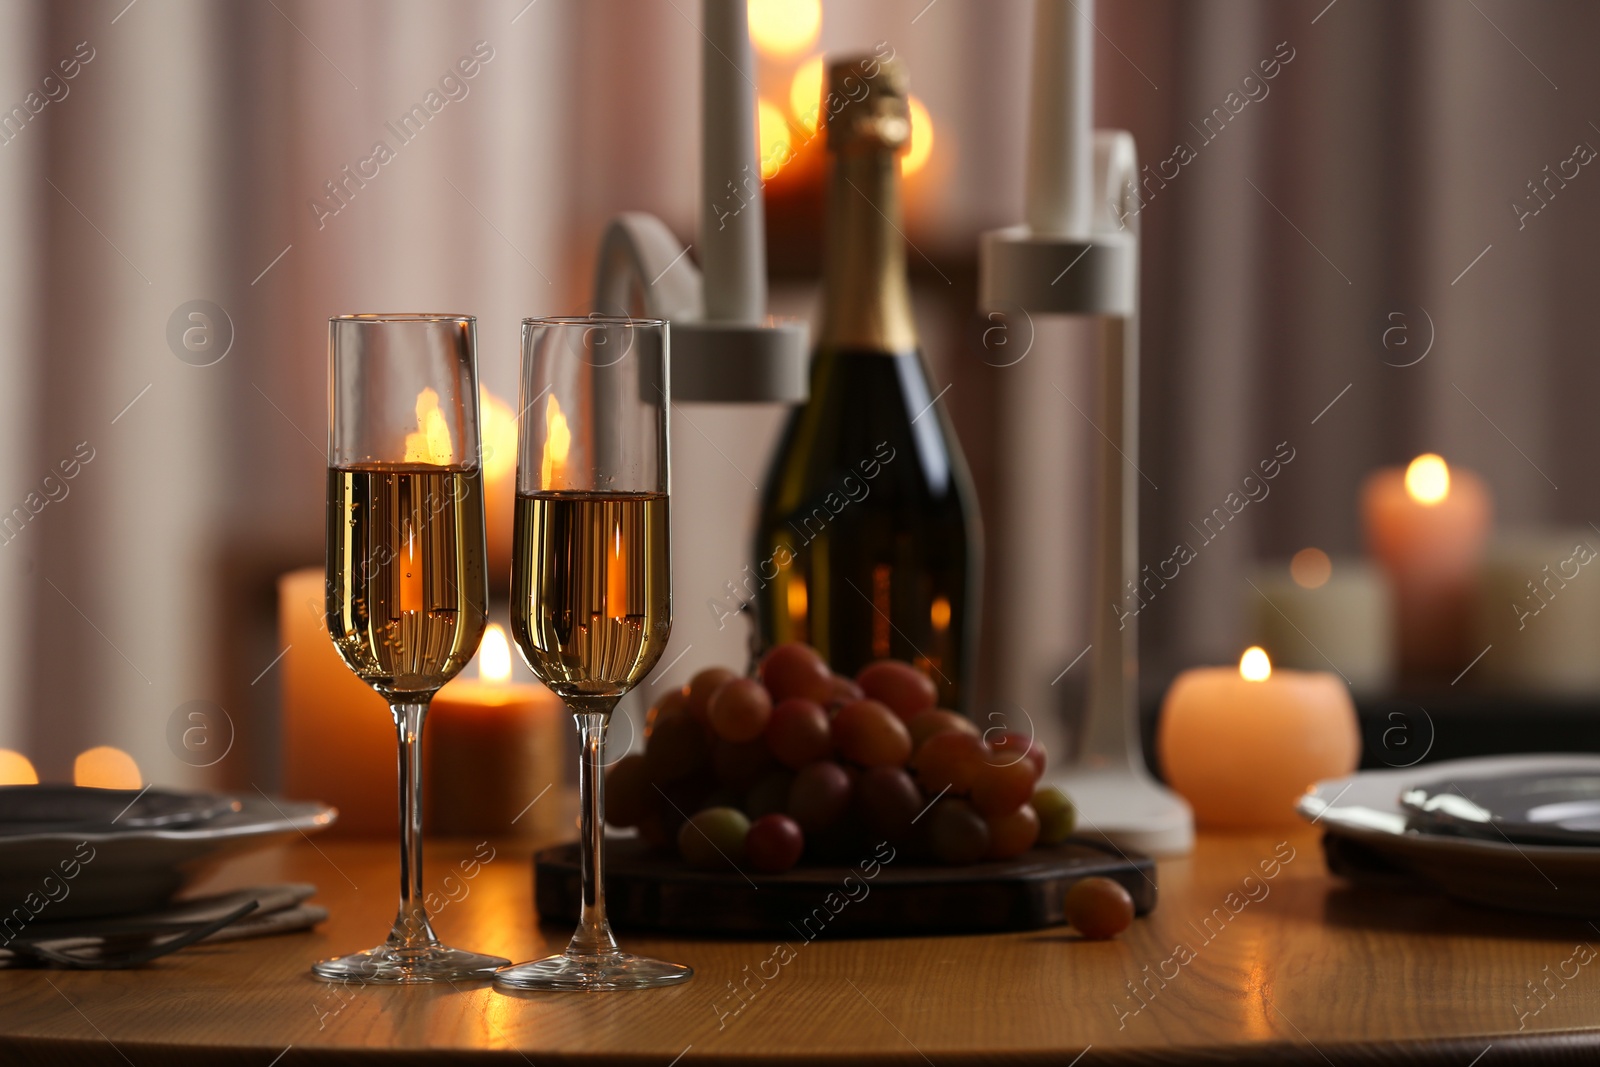 Photo of Glasses of champagne on wooden table against blurred burning candles